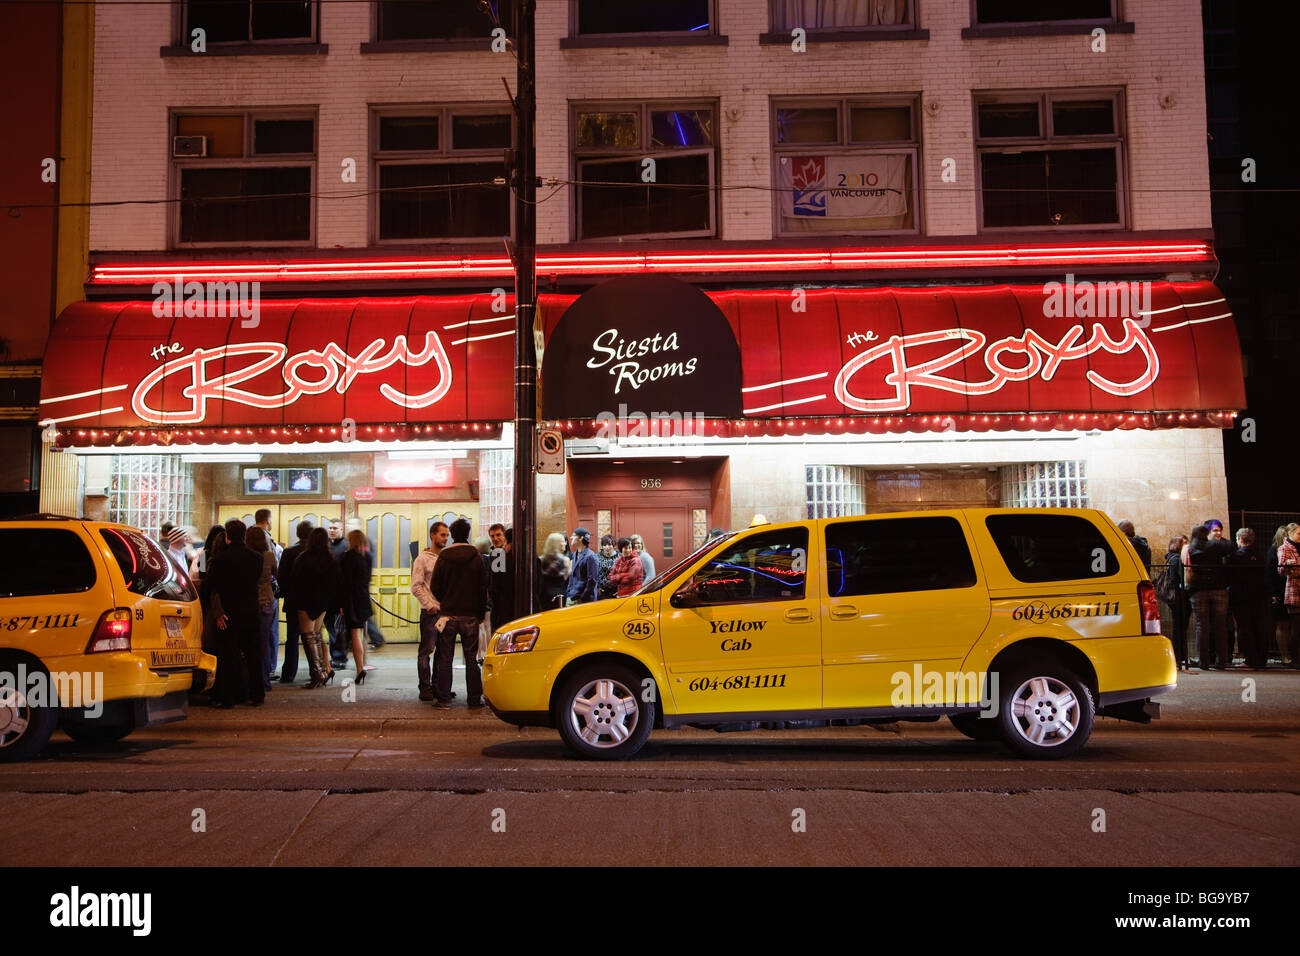 A crowd of people in front of The Roxy nightclub on Granville street, Vancouver, BC, Canada Stock Photo